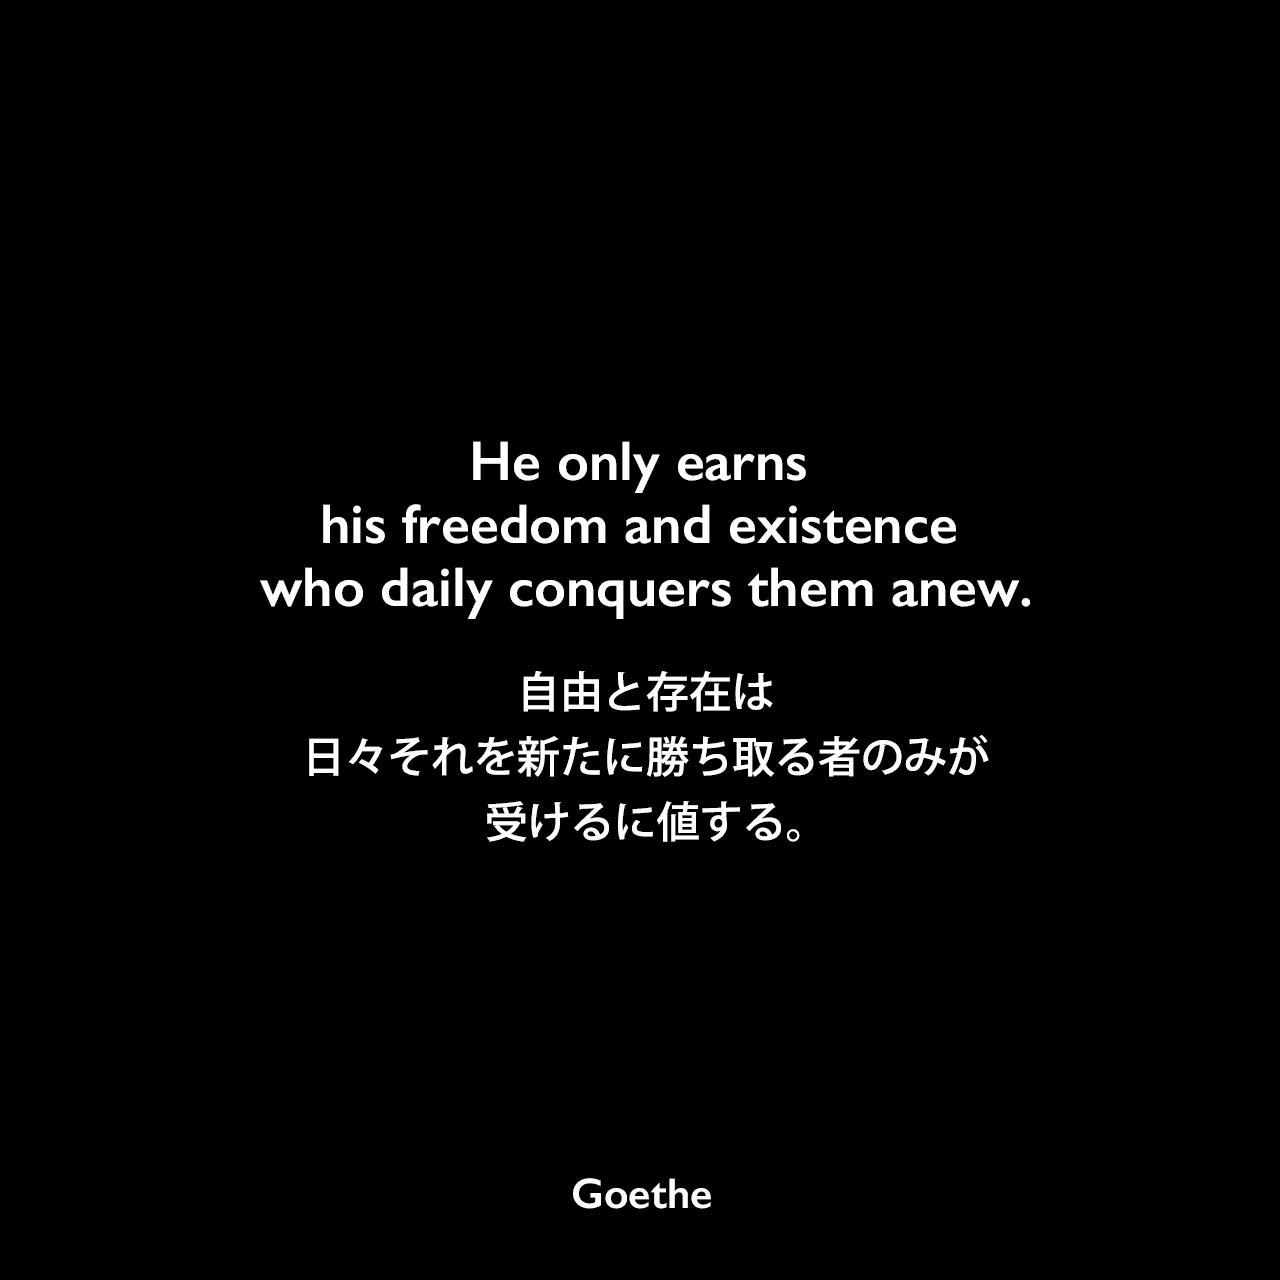 He only earns his freedom and existence who daily conquers them anew.自由と存在は、日々それを新たに勝ち取る者のみが、受けるに値する。- ゲーテの戯曲「ファウスト 第二部」よりJohann Wolfgang von Goethe